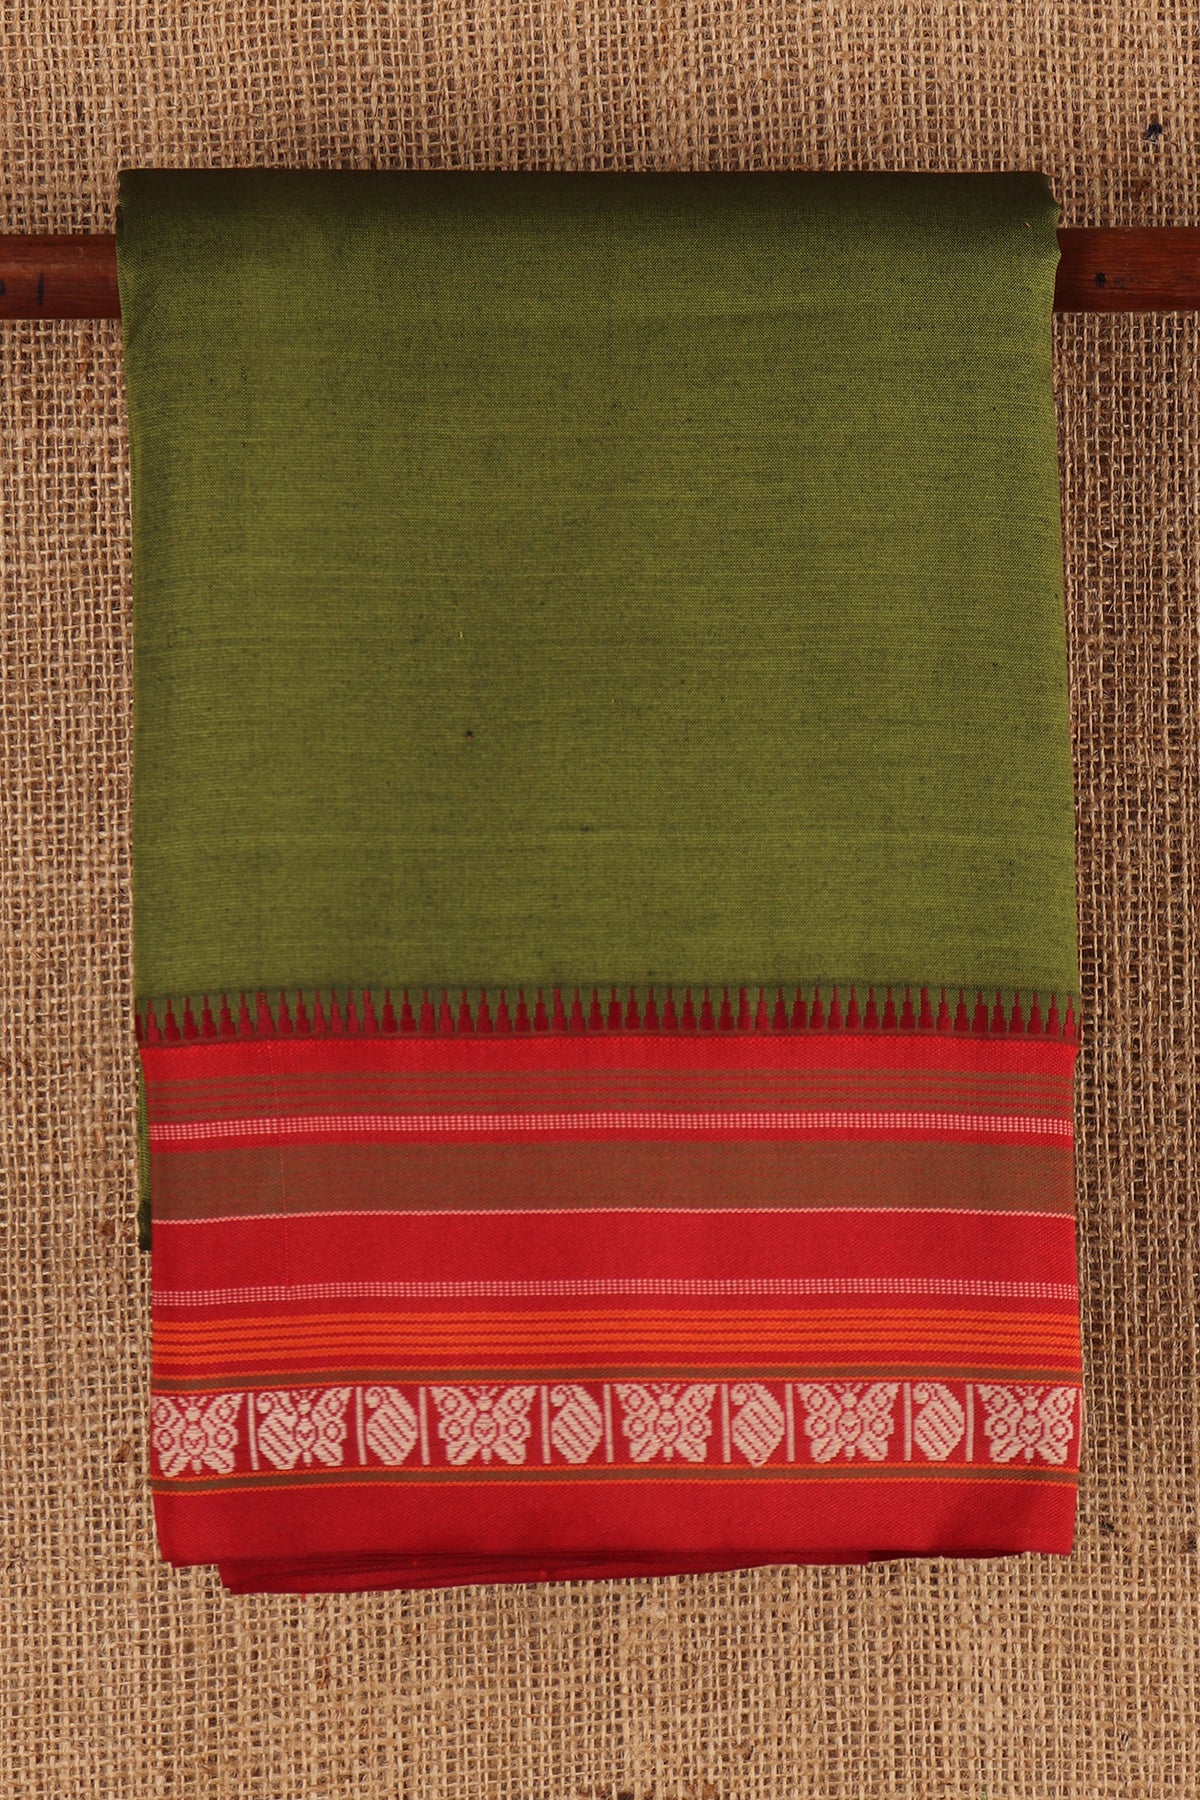 Temple Border With Forest Green Dharwad Cotton Saree